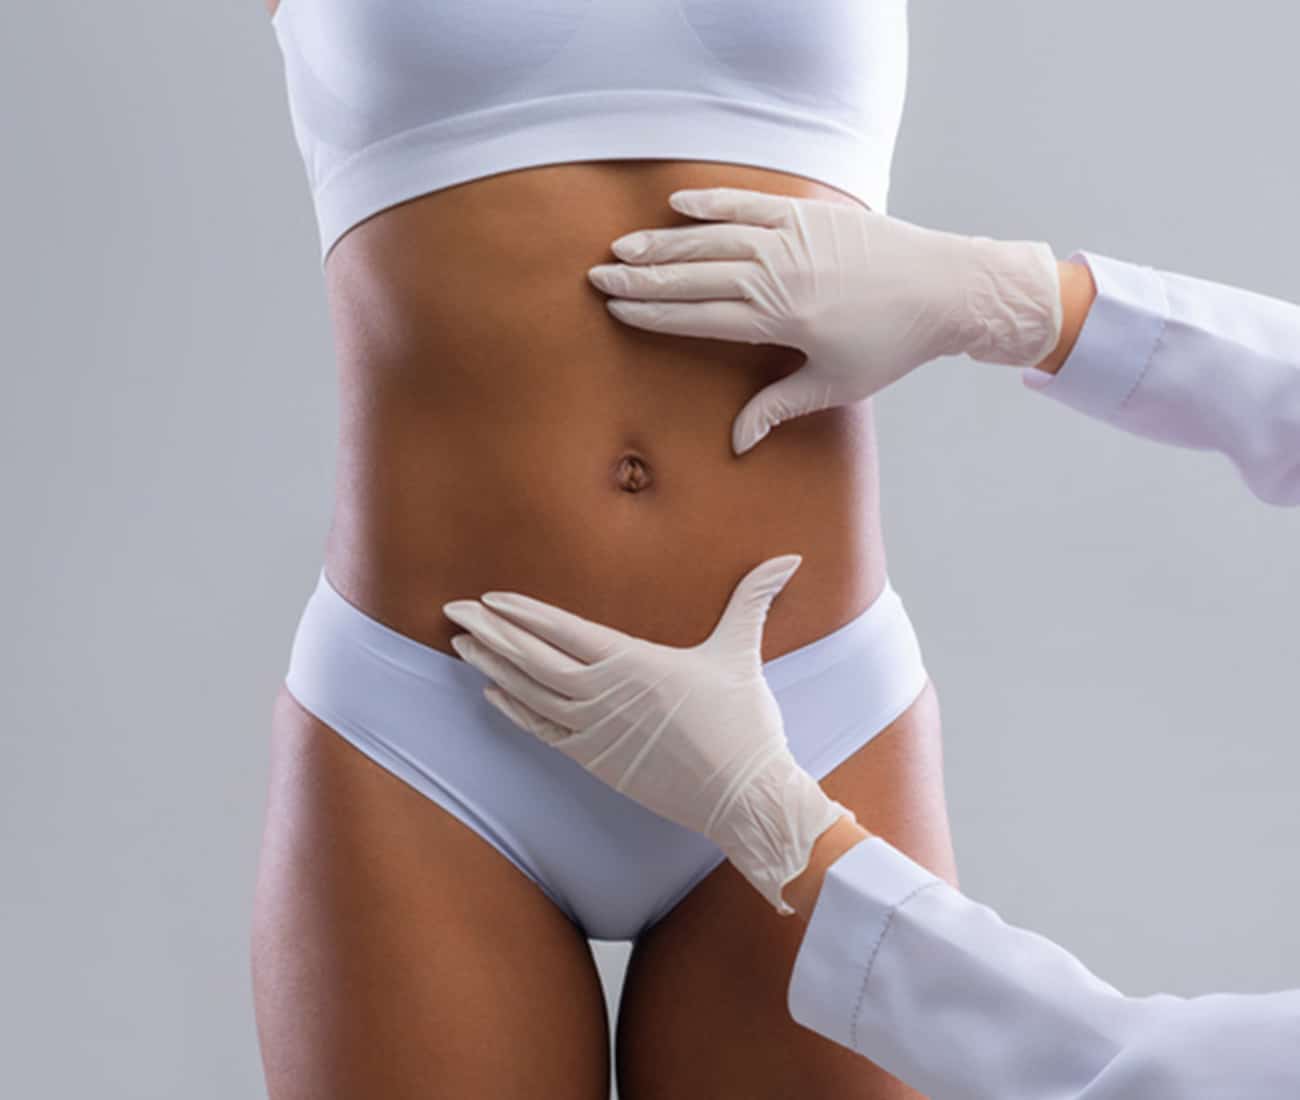 Doctor checking patients abdomen for body sculpting treatment